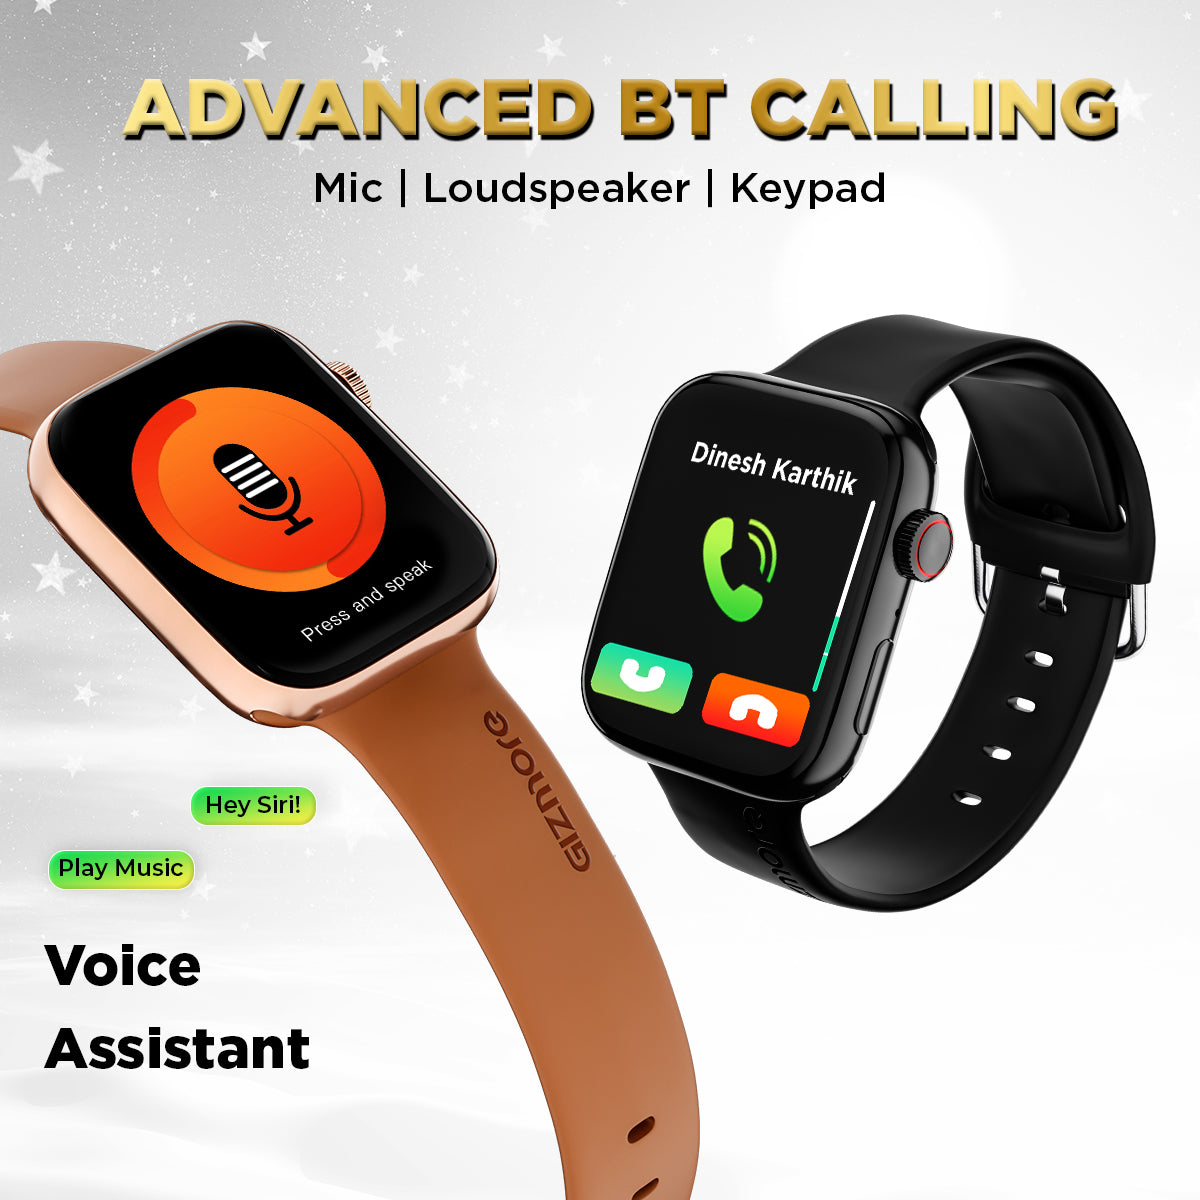 GIZMORE Star 1.85 IPS Gizfit 928 Large Display with Rotating Crown Controls| AI Voice Assistant | Bluetooth Calling Smartwatch